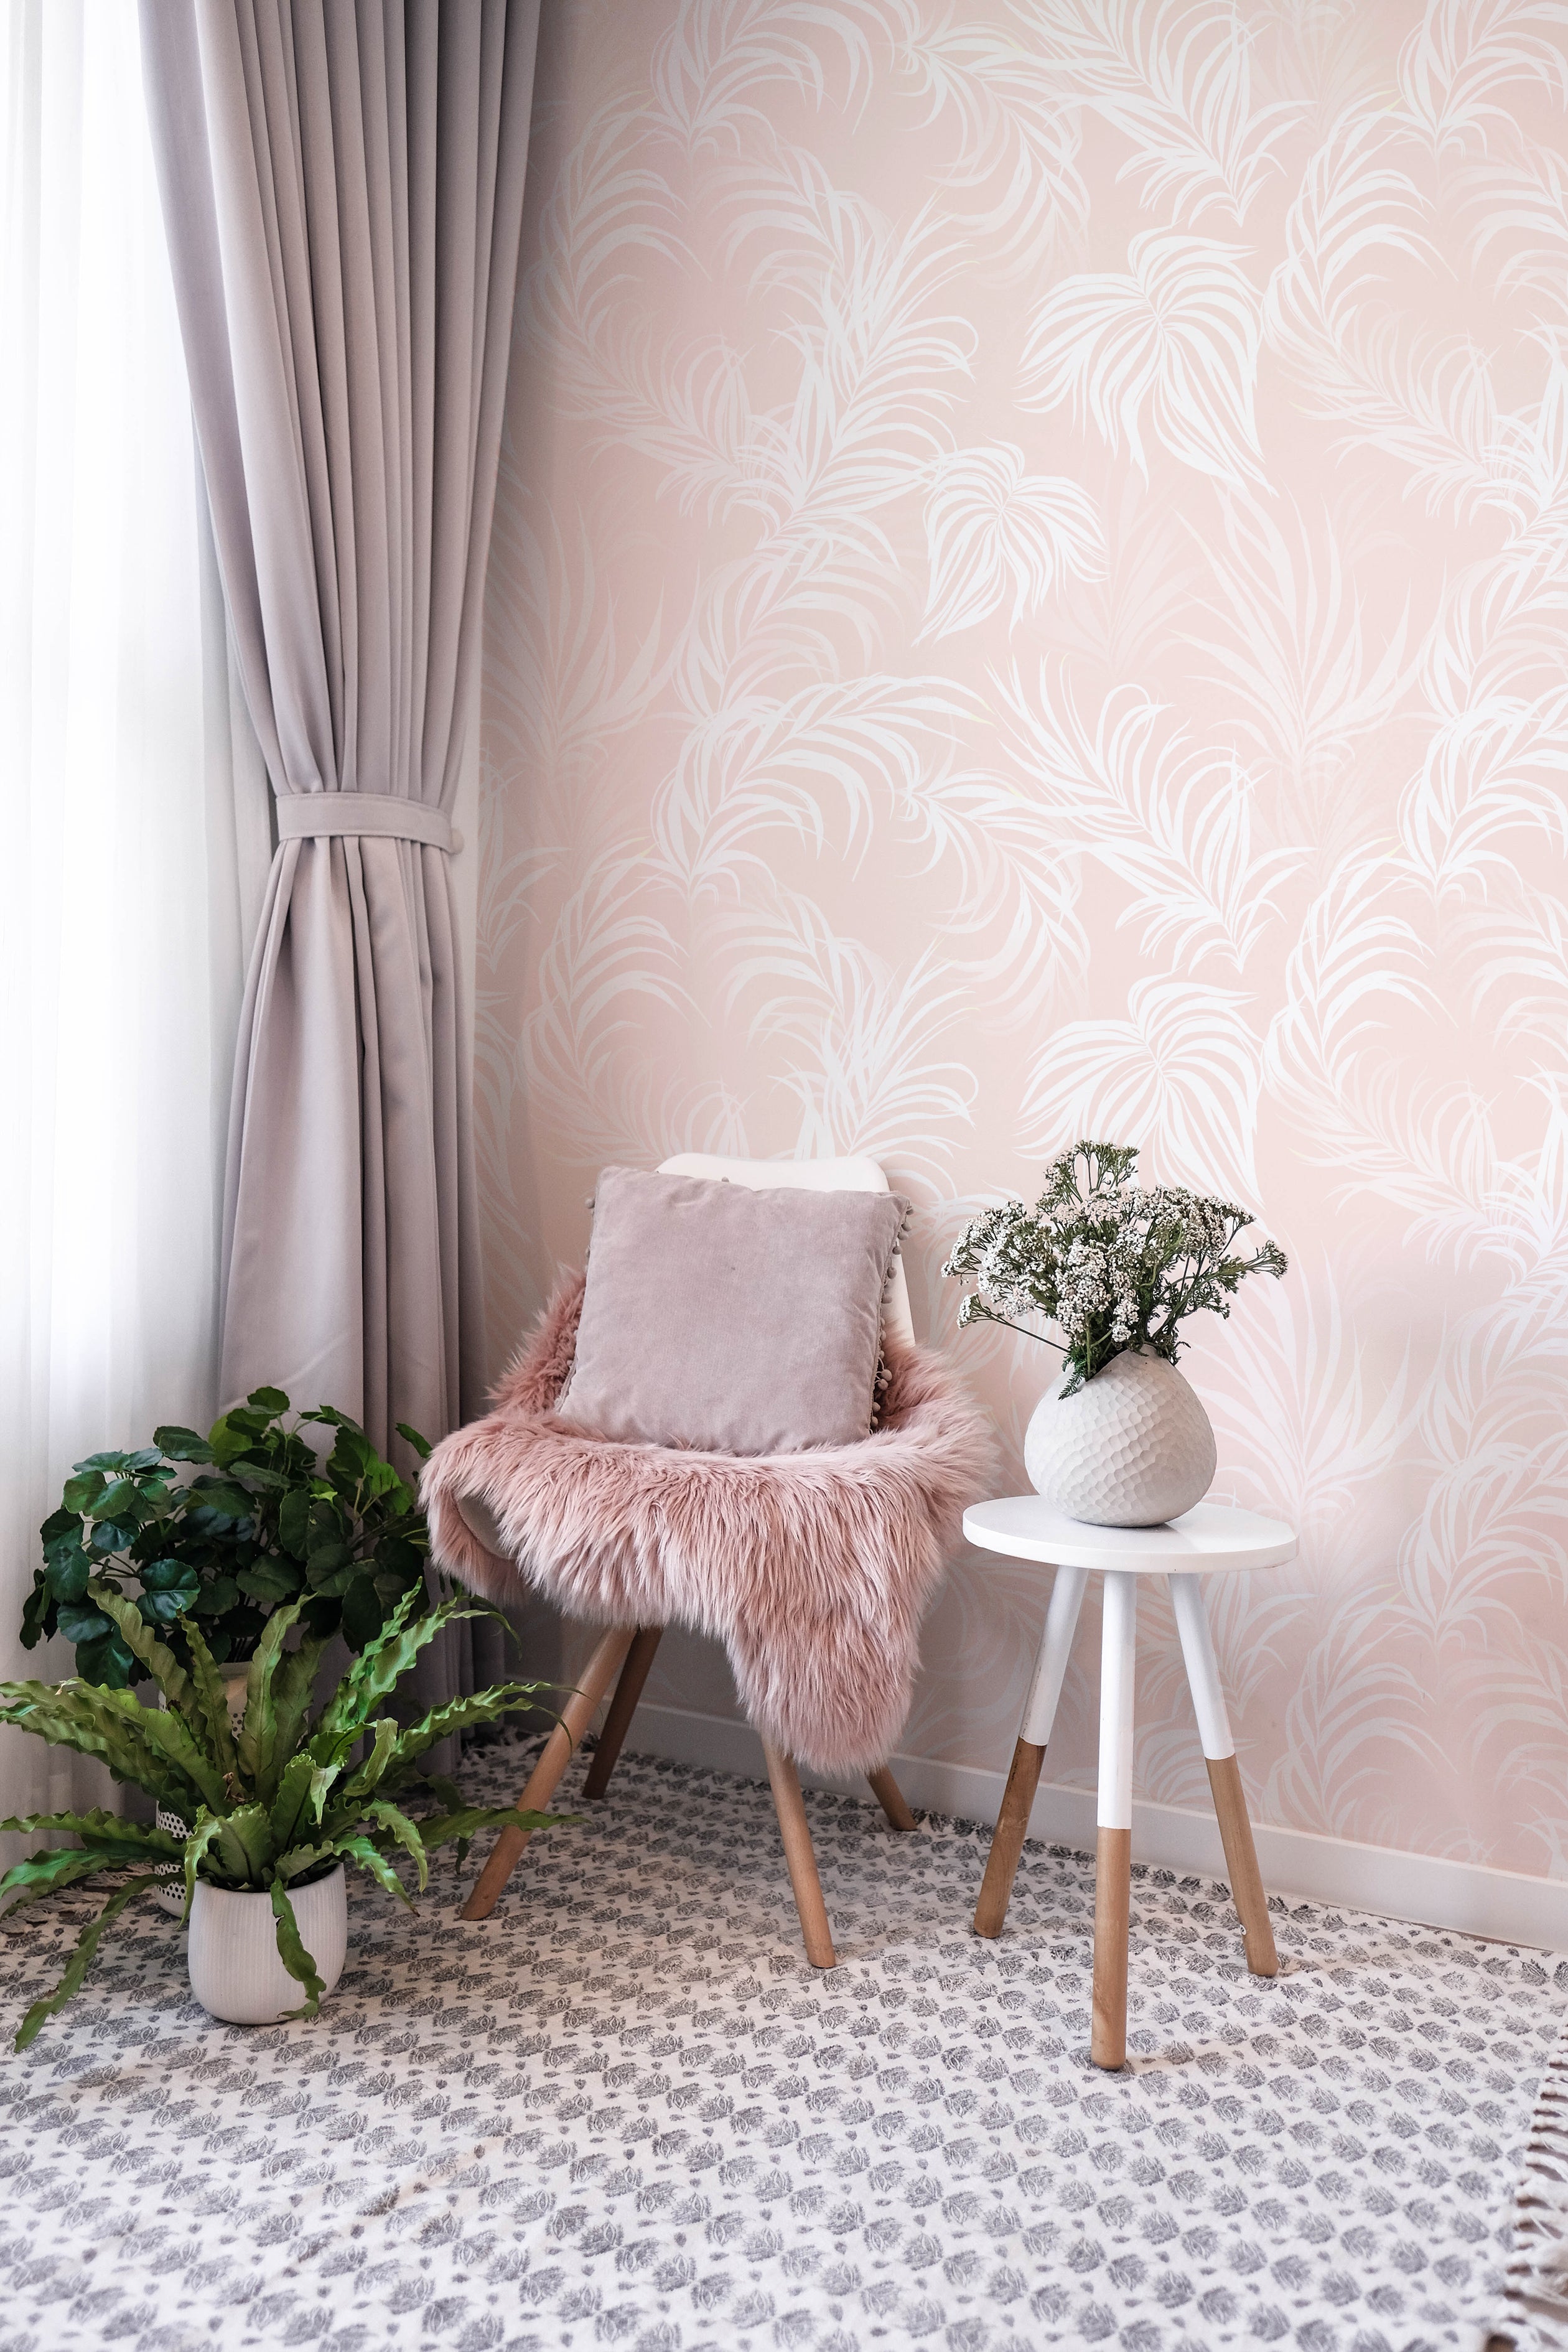 A cozy nook enhanced by the "Tropical Champagne Wallpaper," displaying a soothing palette of blush pink with white tropical foliage designs. This wallpaper brings a touch of understated elegance to the space, beautifully paired with a plush chair, a simple white side table, and soft decorative accents.